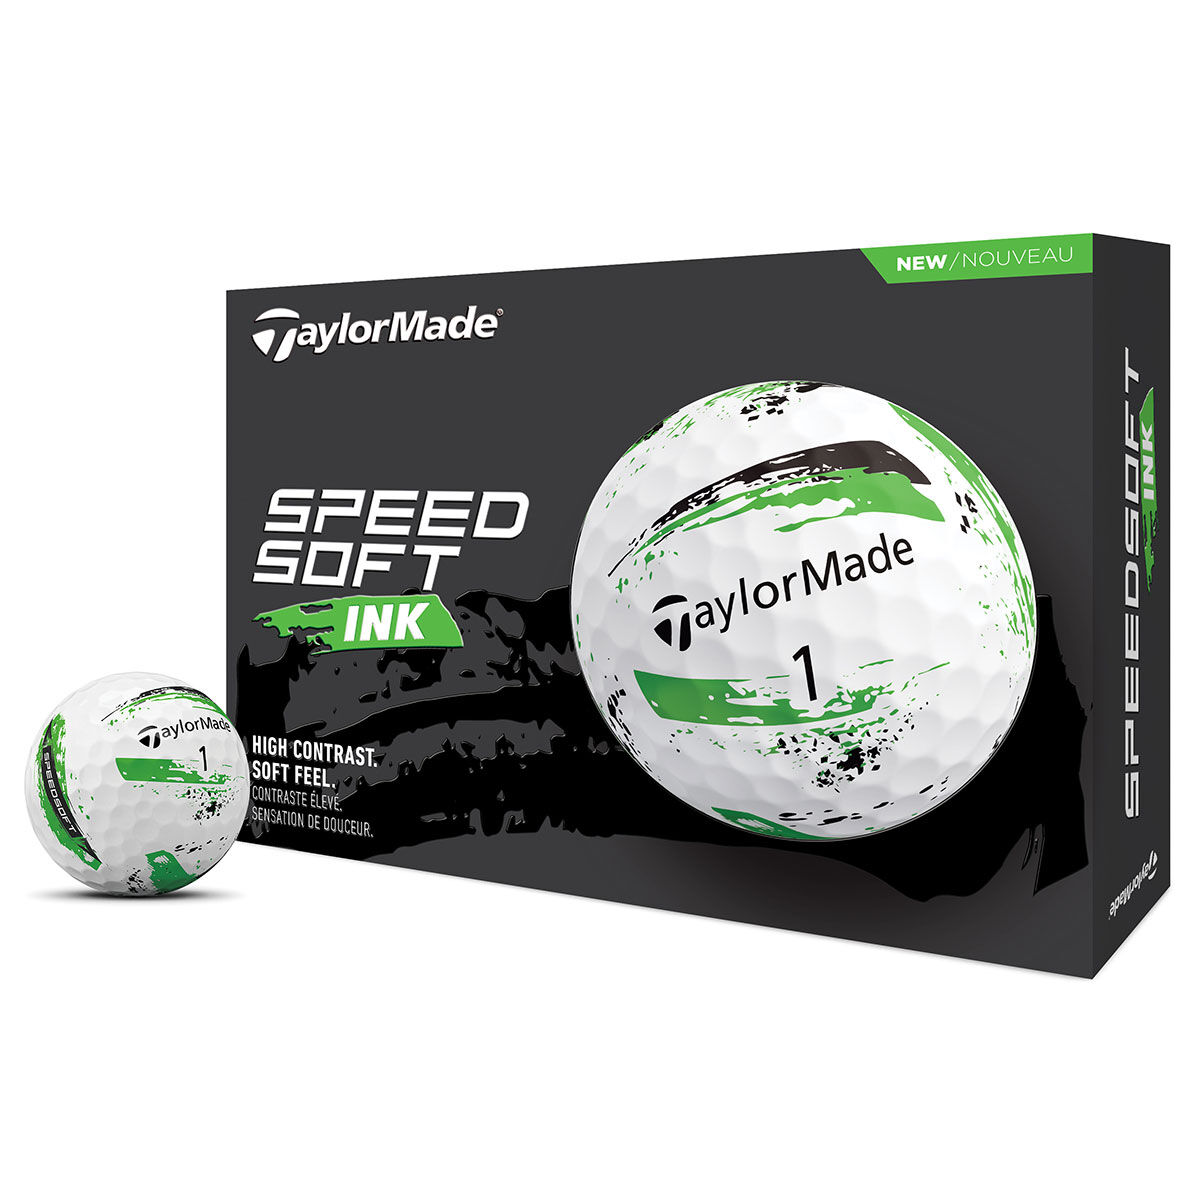 TaylorMade SpeedSoft Ink 12 Golf Ball Pack, Mens, Green, One Size | American Golf - Father's Day Gift von TaylorMade